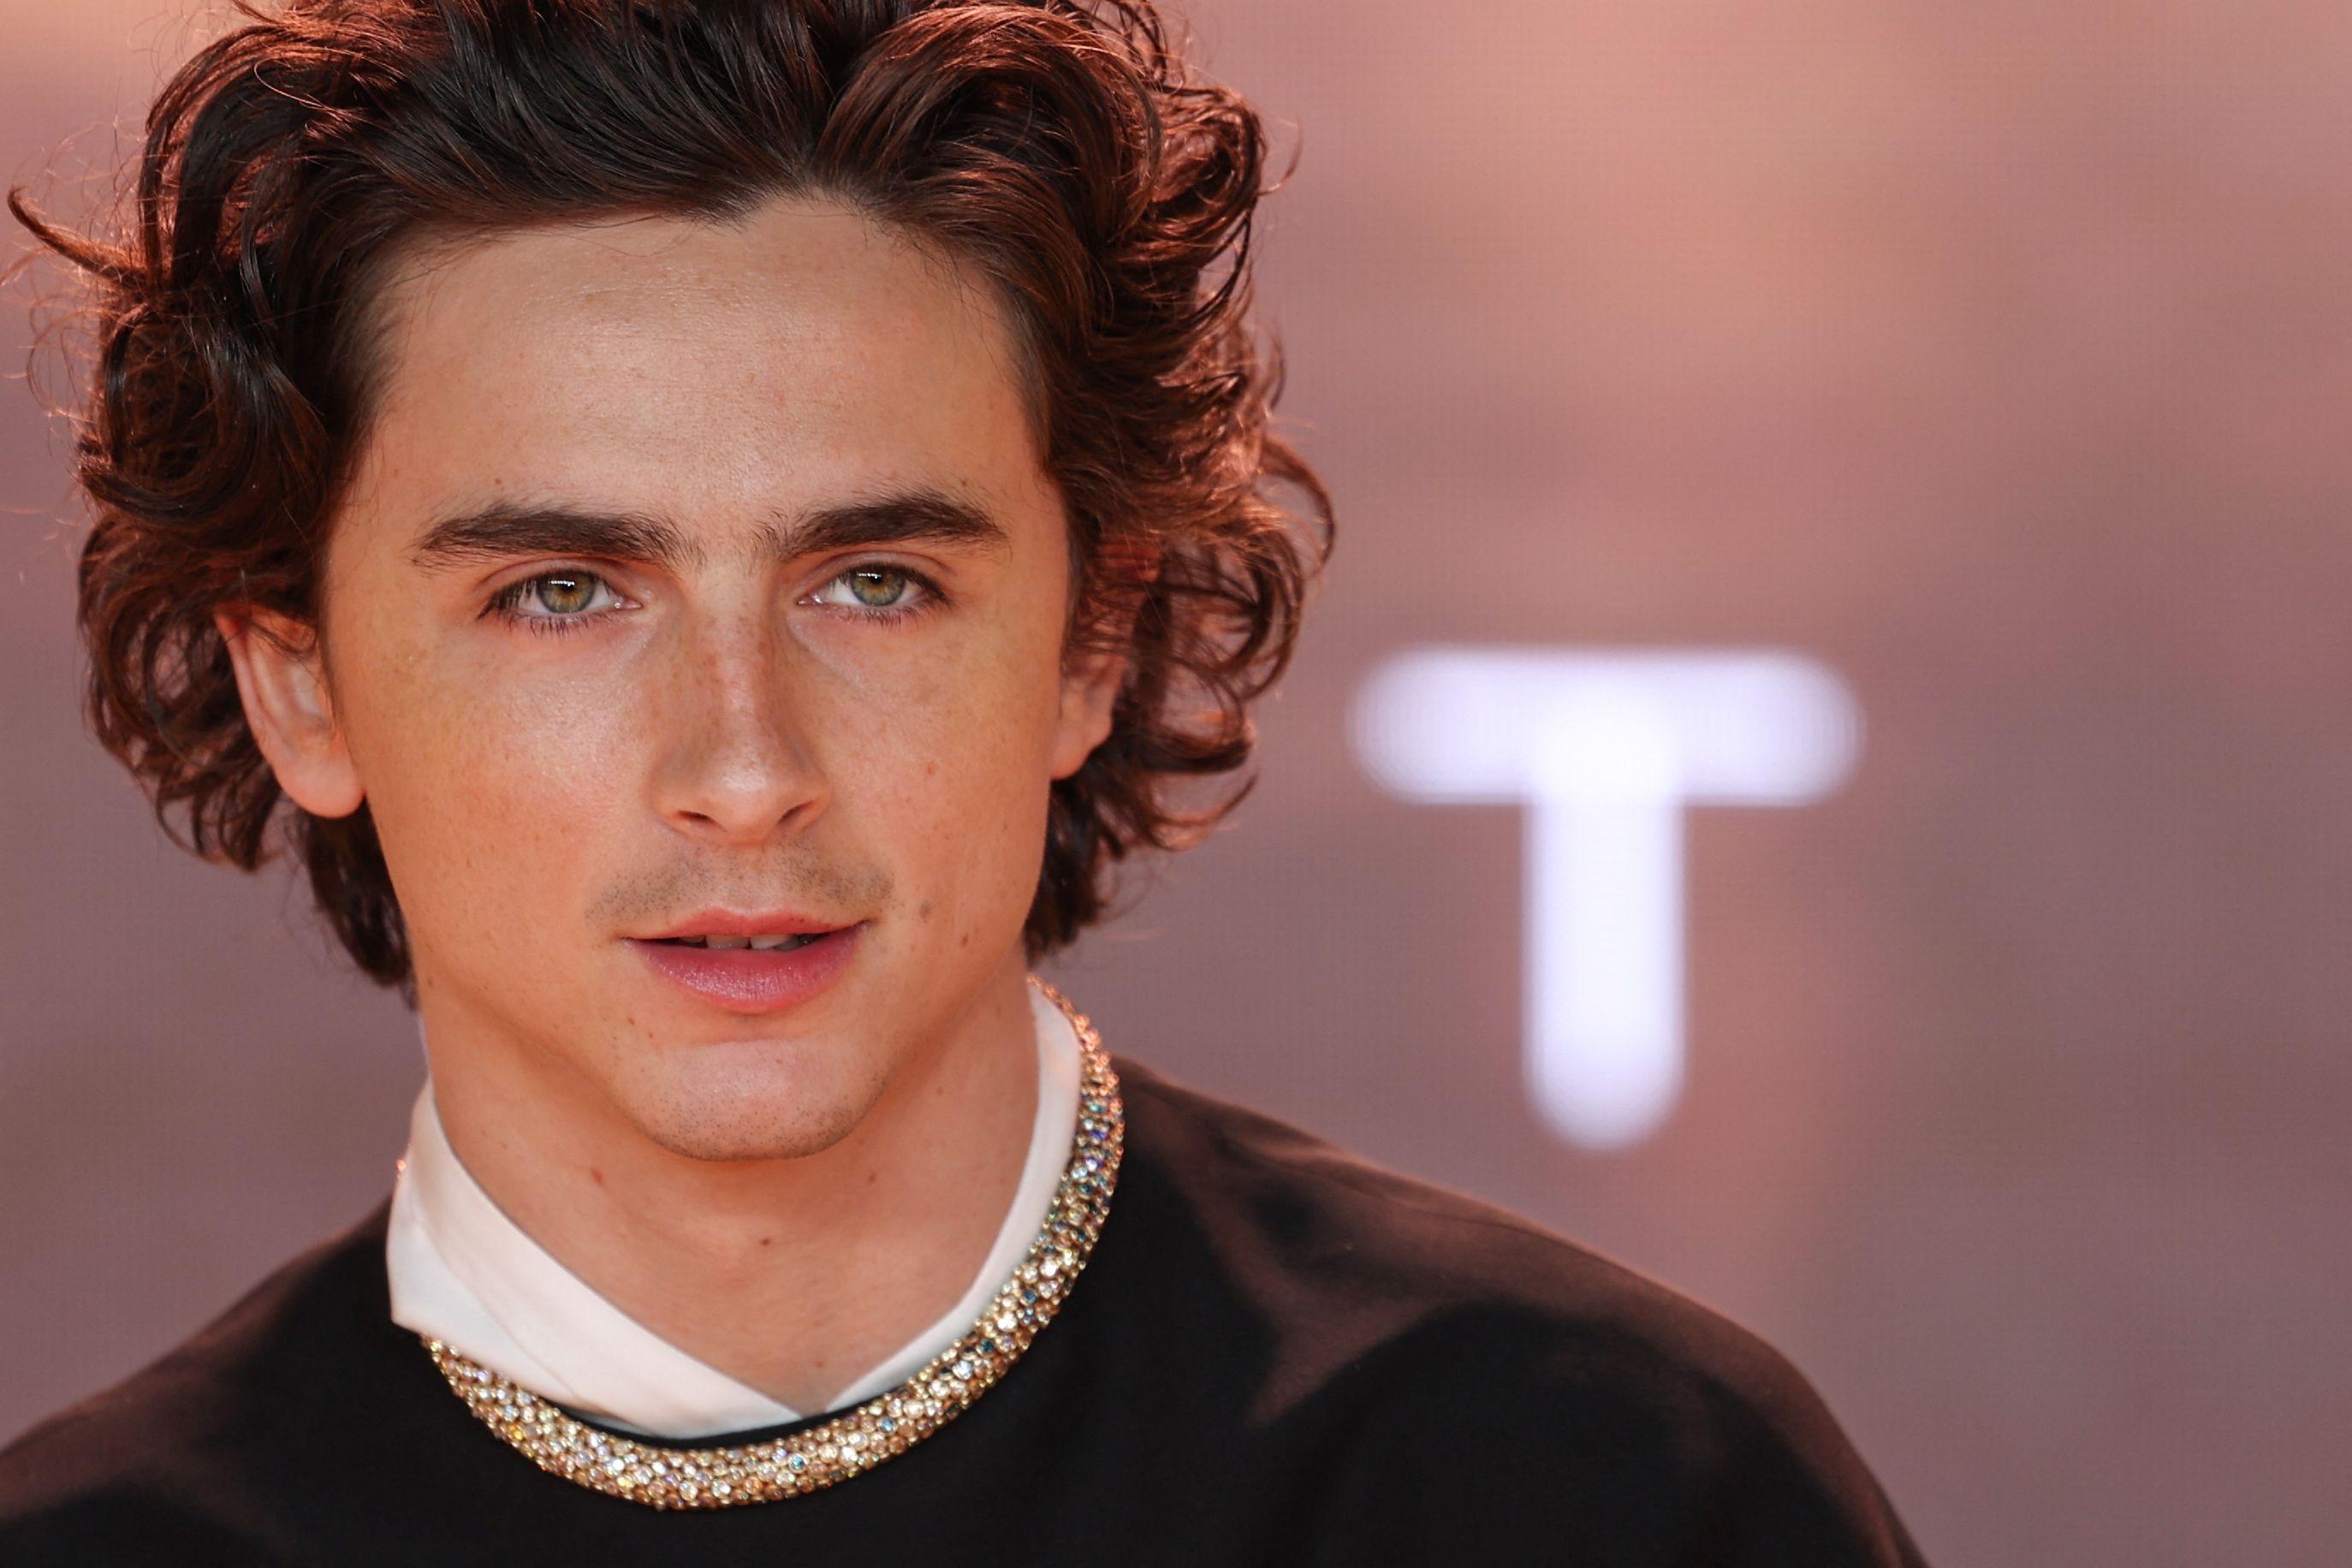 Timothee Chalamet wore a chic suit and brought his stunning looks to the Dune 2 premiere. His rumoured girlfriend Kylie Jenner did not join